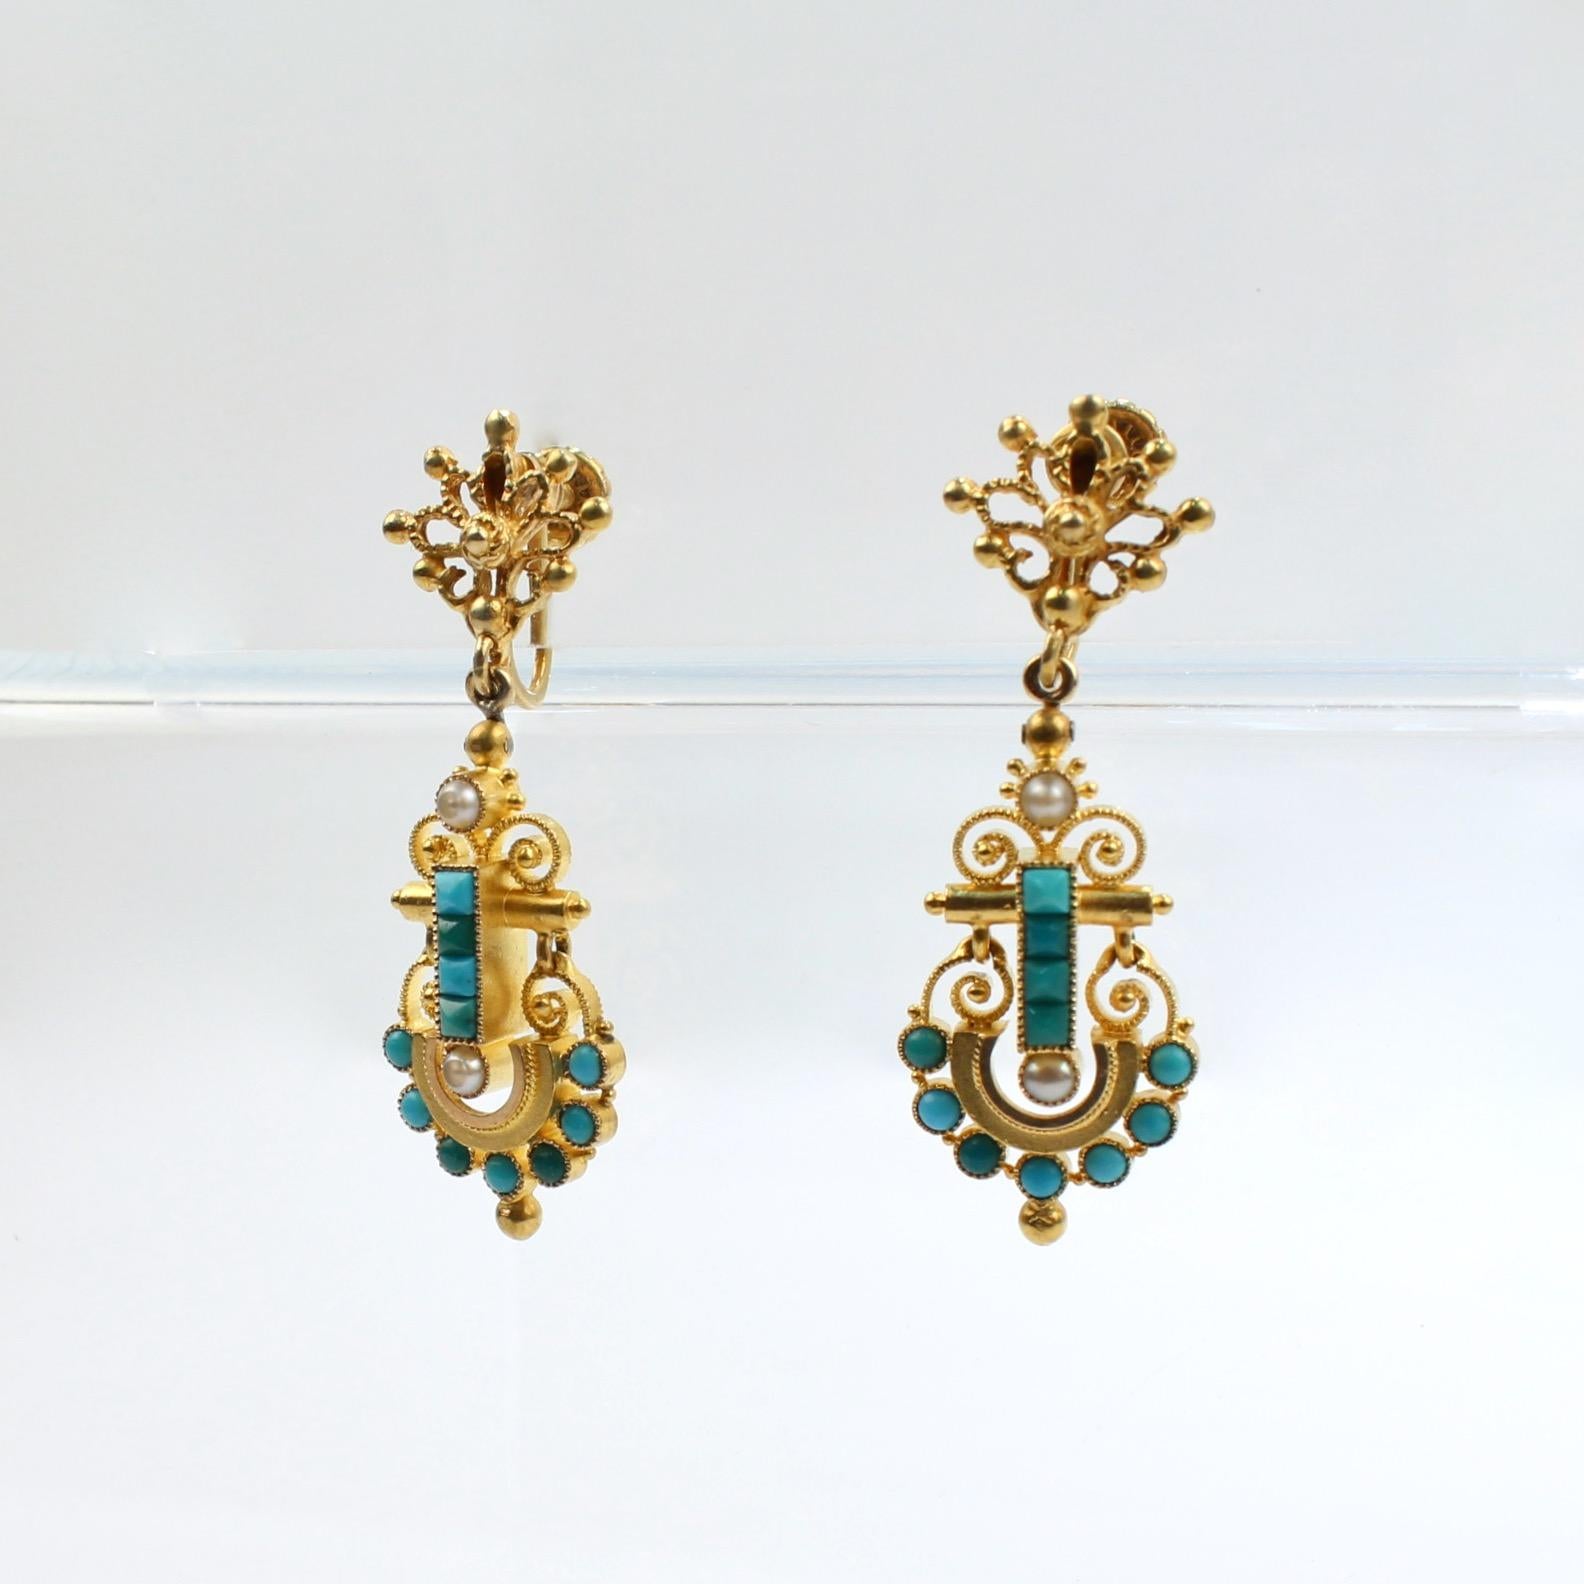 Etruscan Revival Victorian Etruscan 14 Karat Gold, Turquoise and Pearl Clip-On Earrings